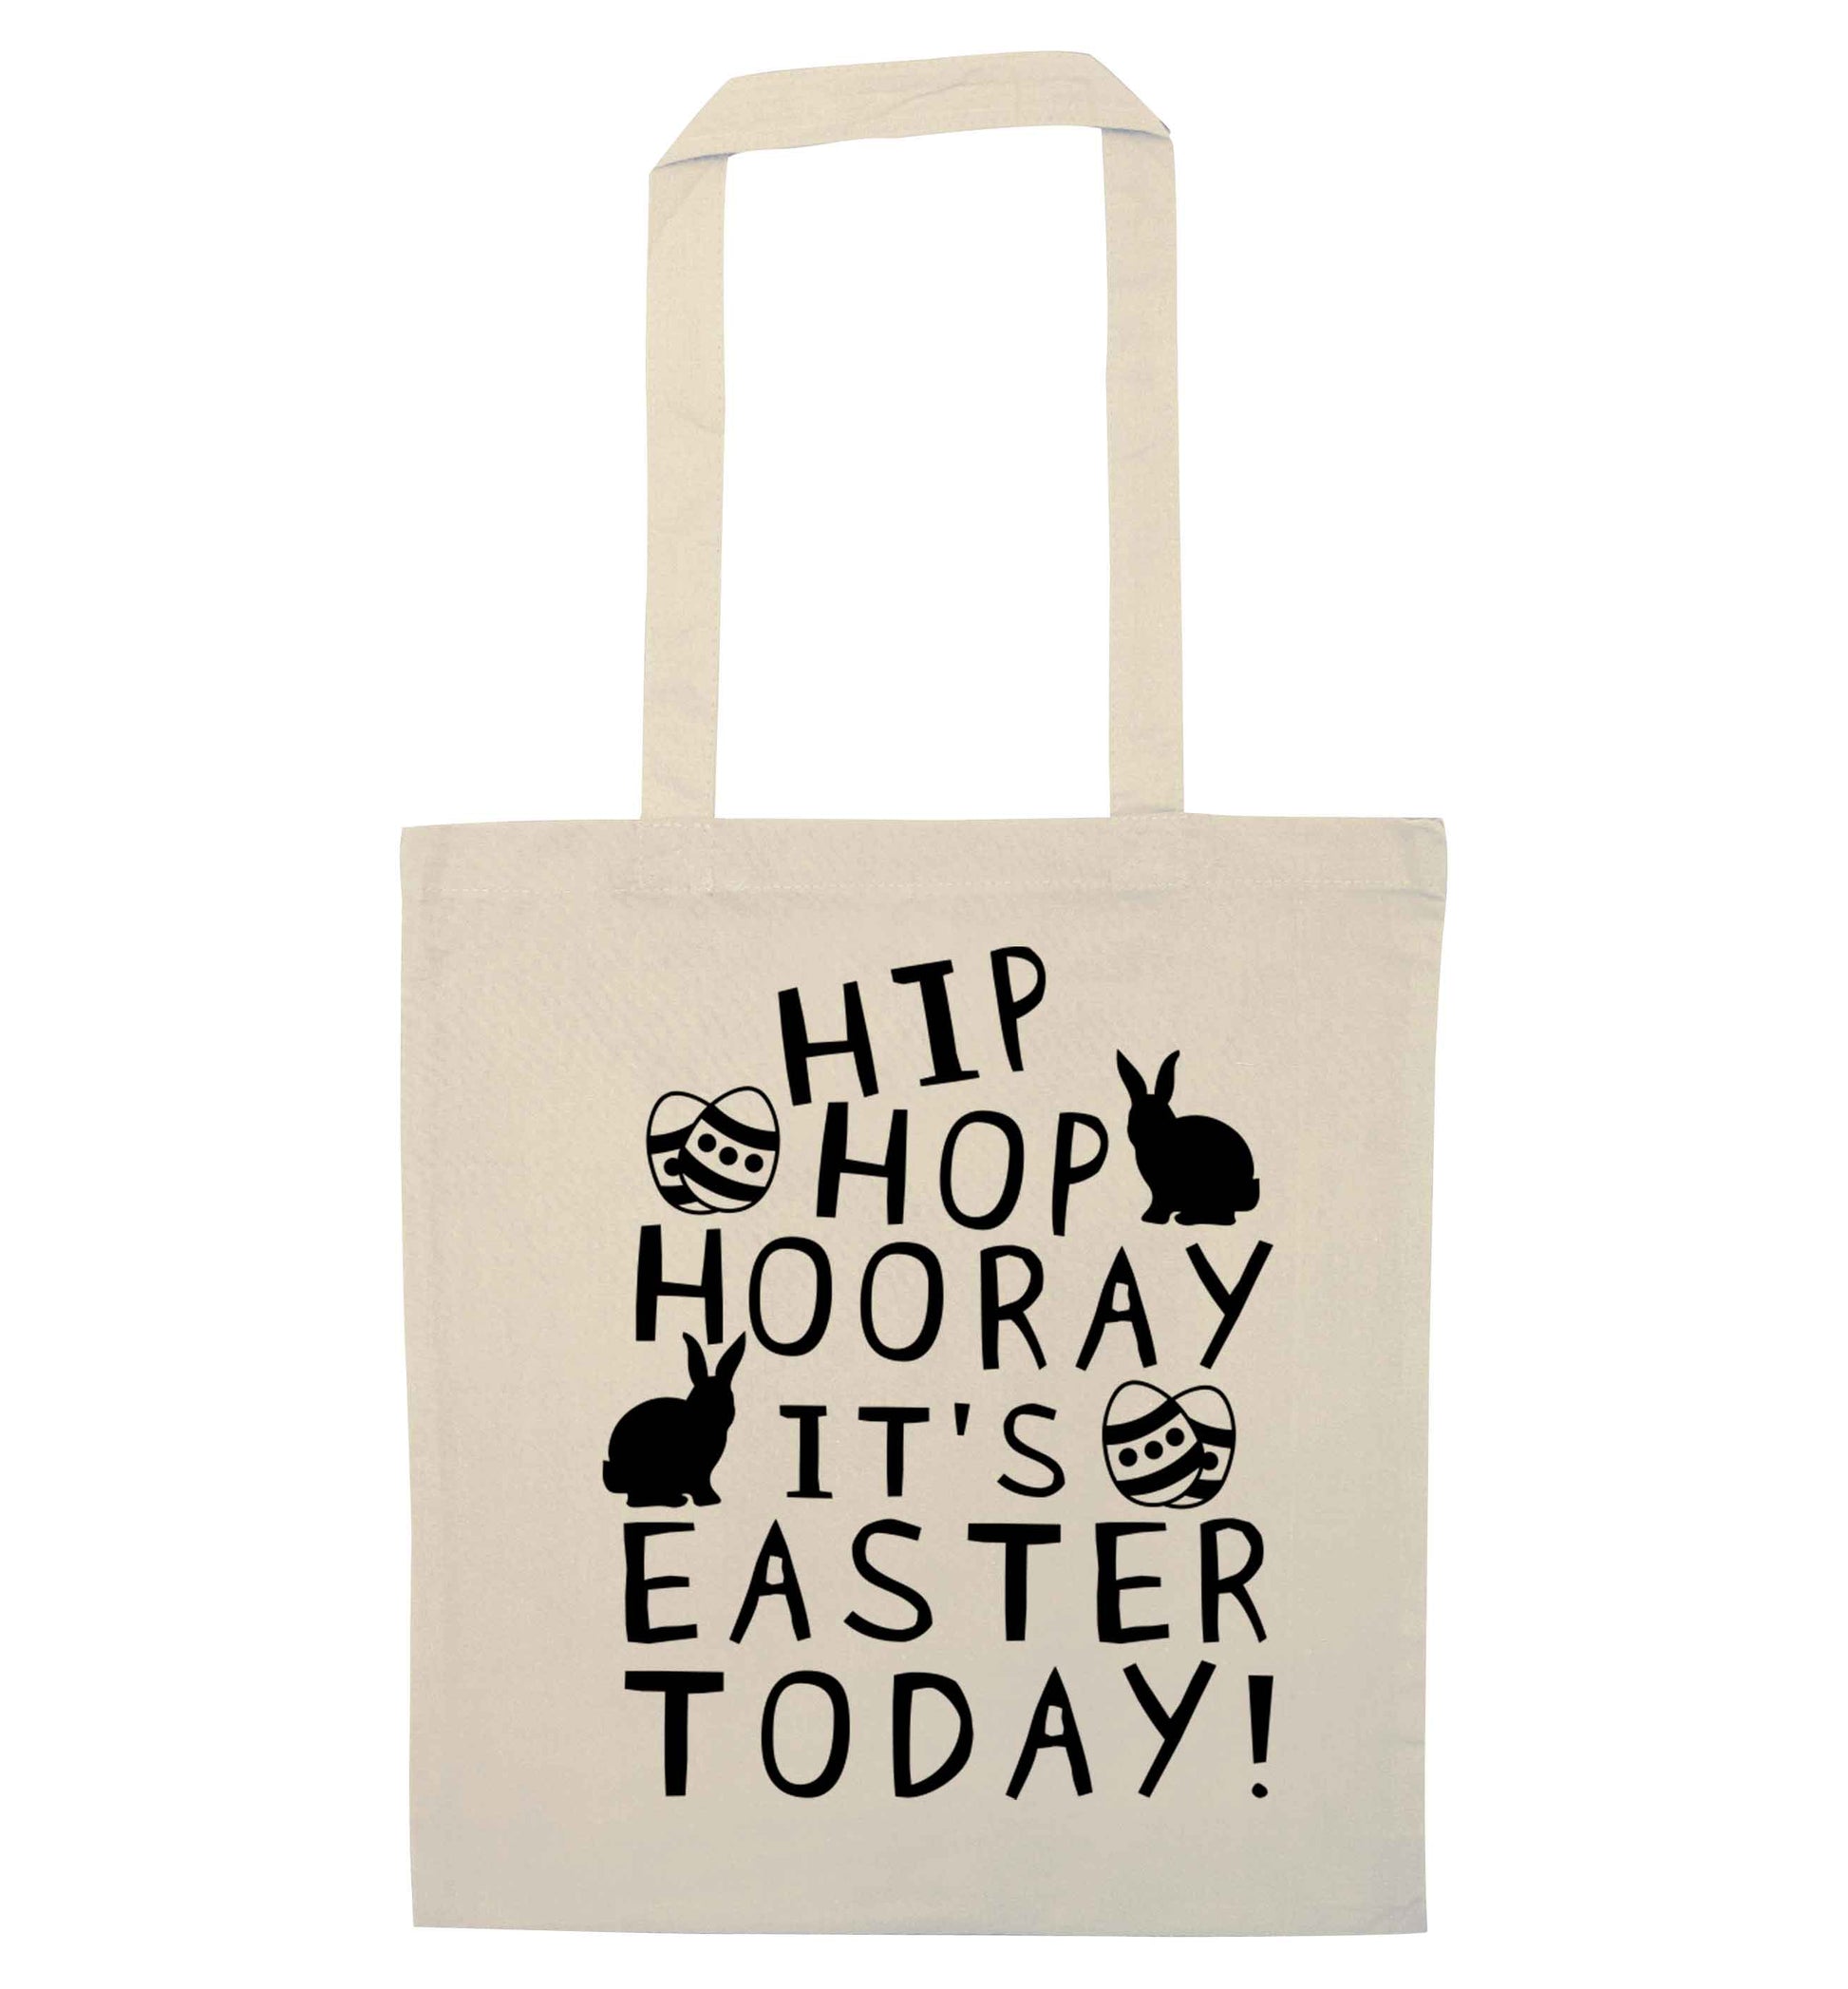 Hip hip hooray it's Easter today! natural tote bag